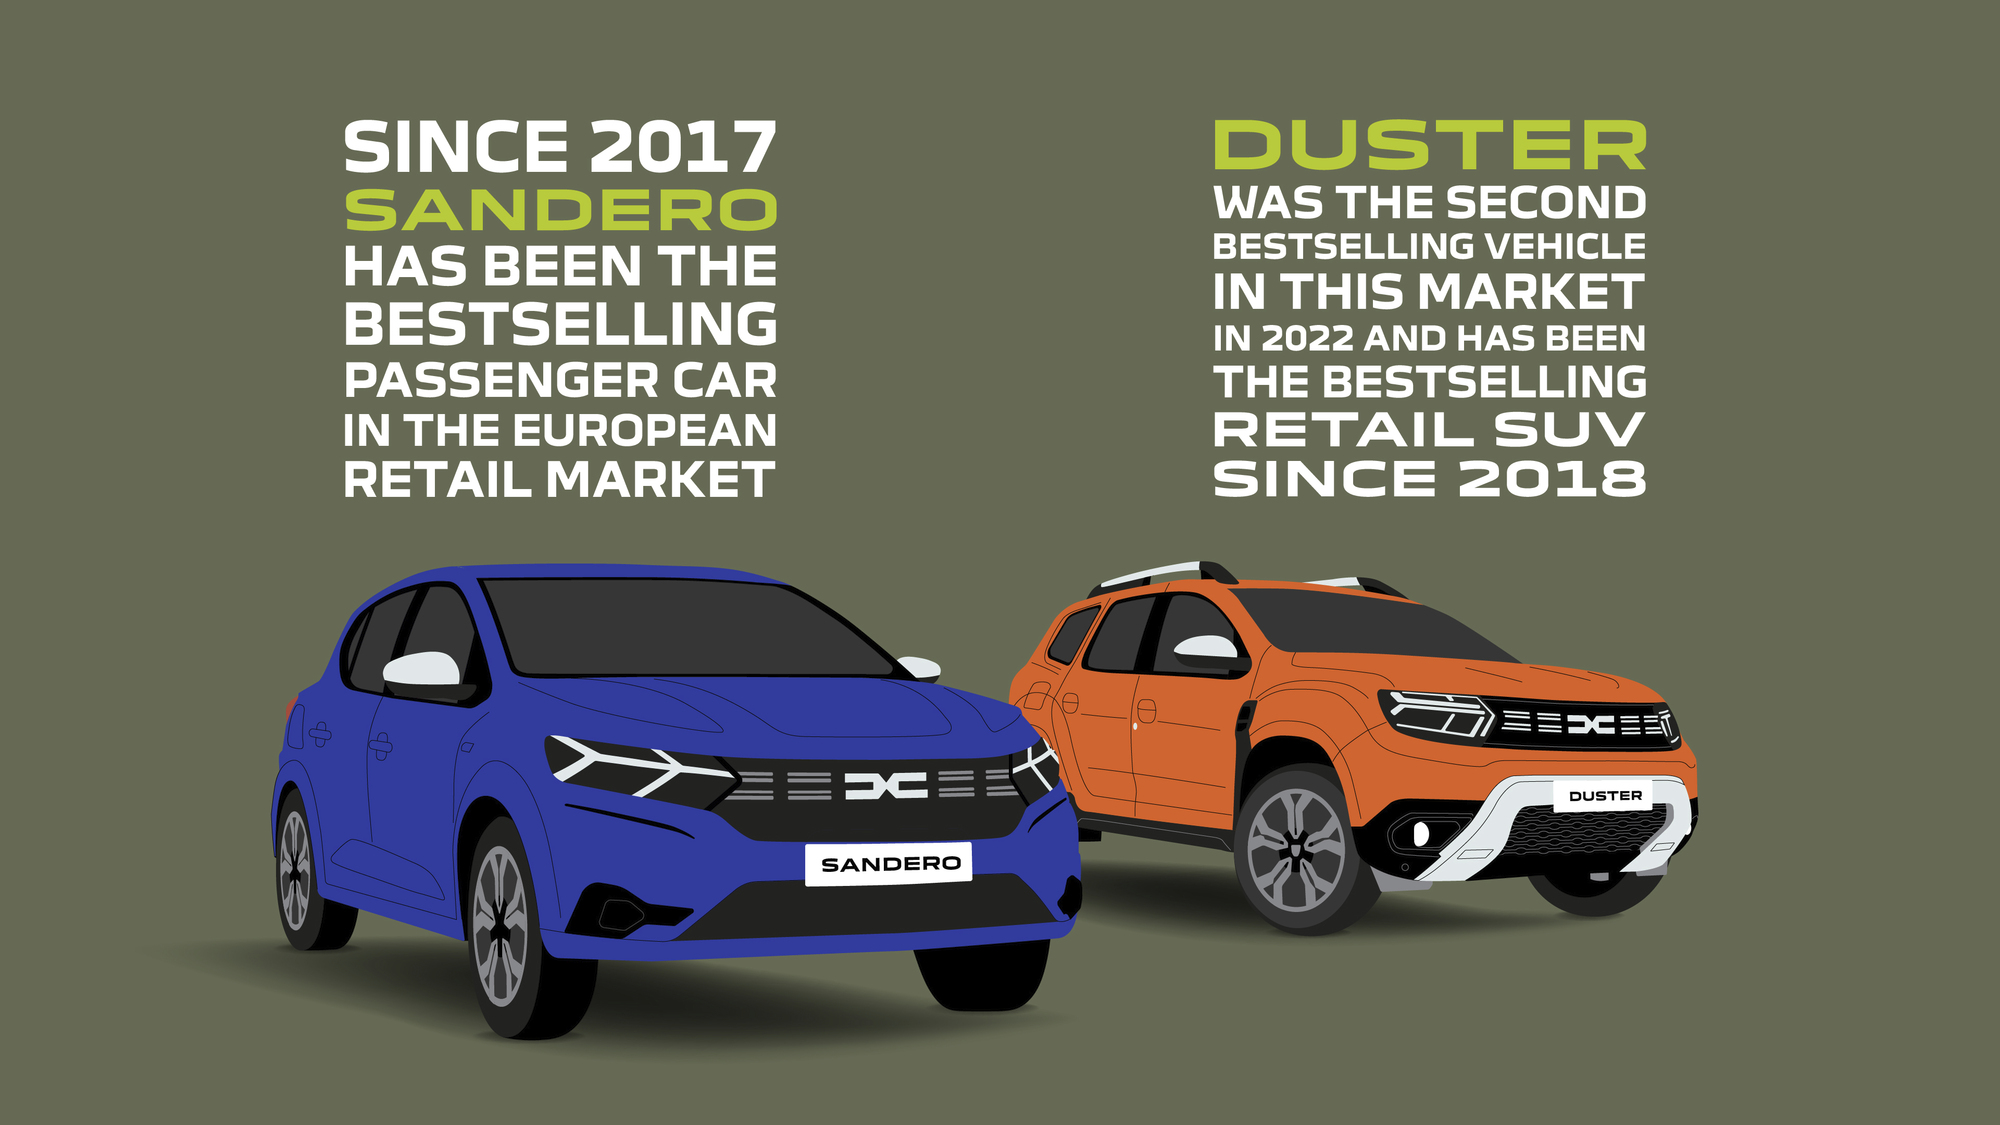 Discover the All-New Dacia Sandero and Sandero Stepway's secrets with these  three expert interviews. - Renault Group